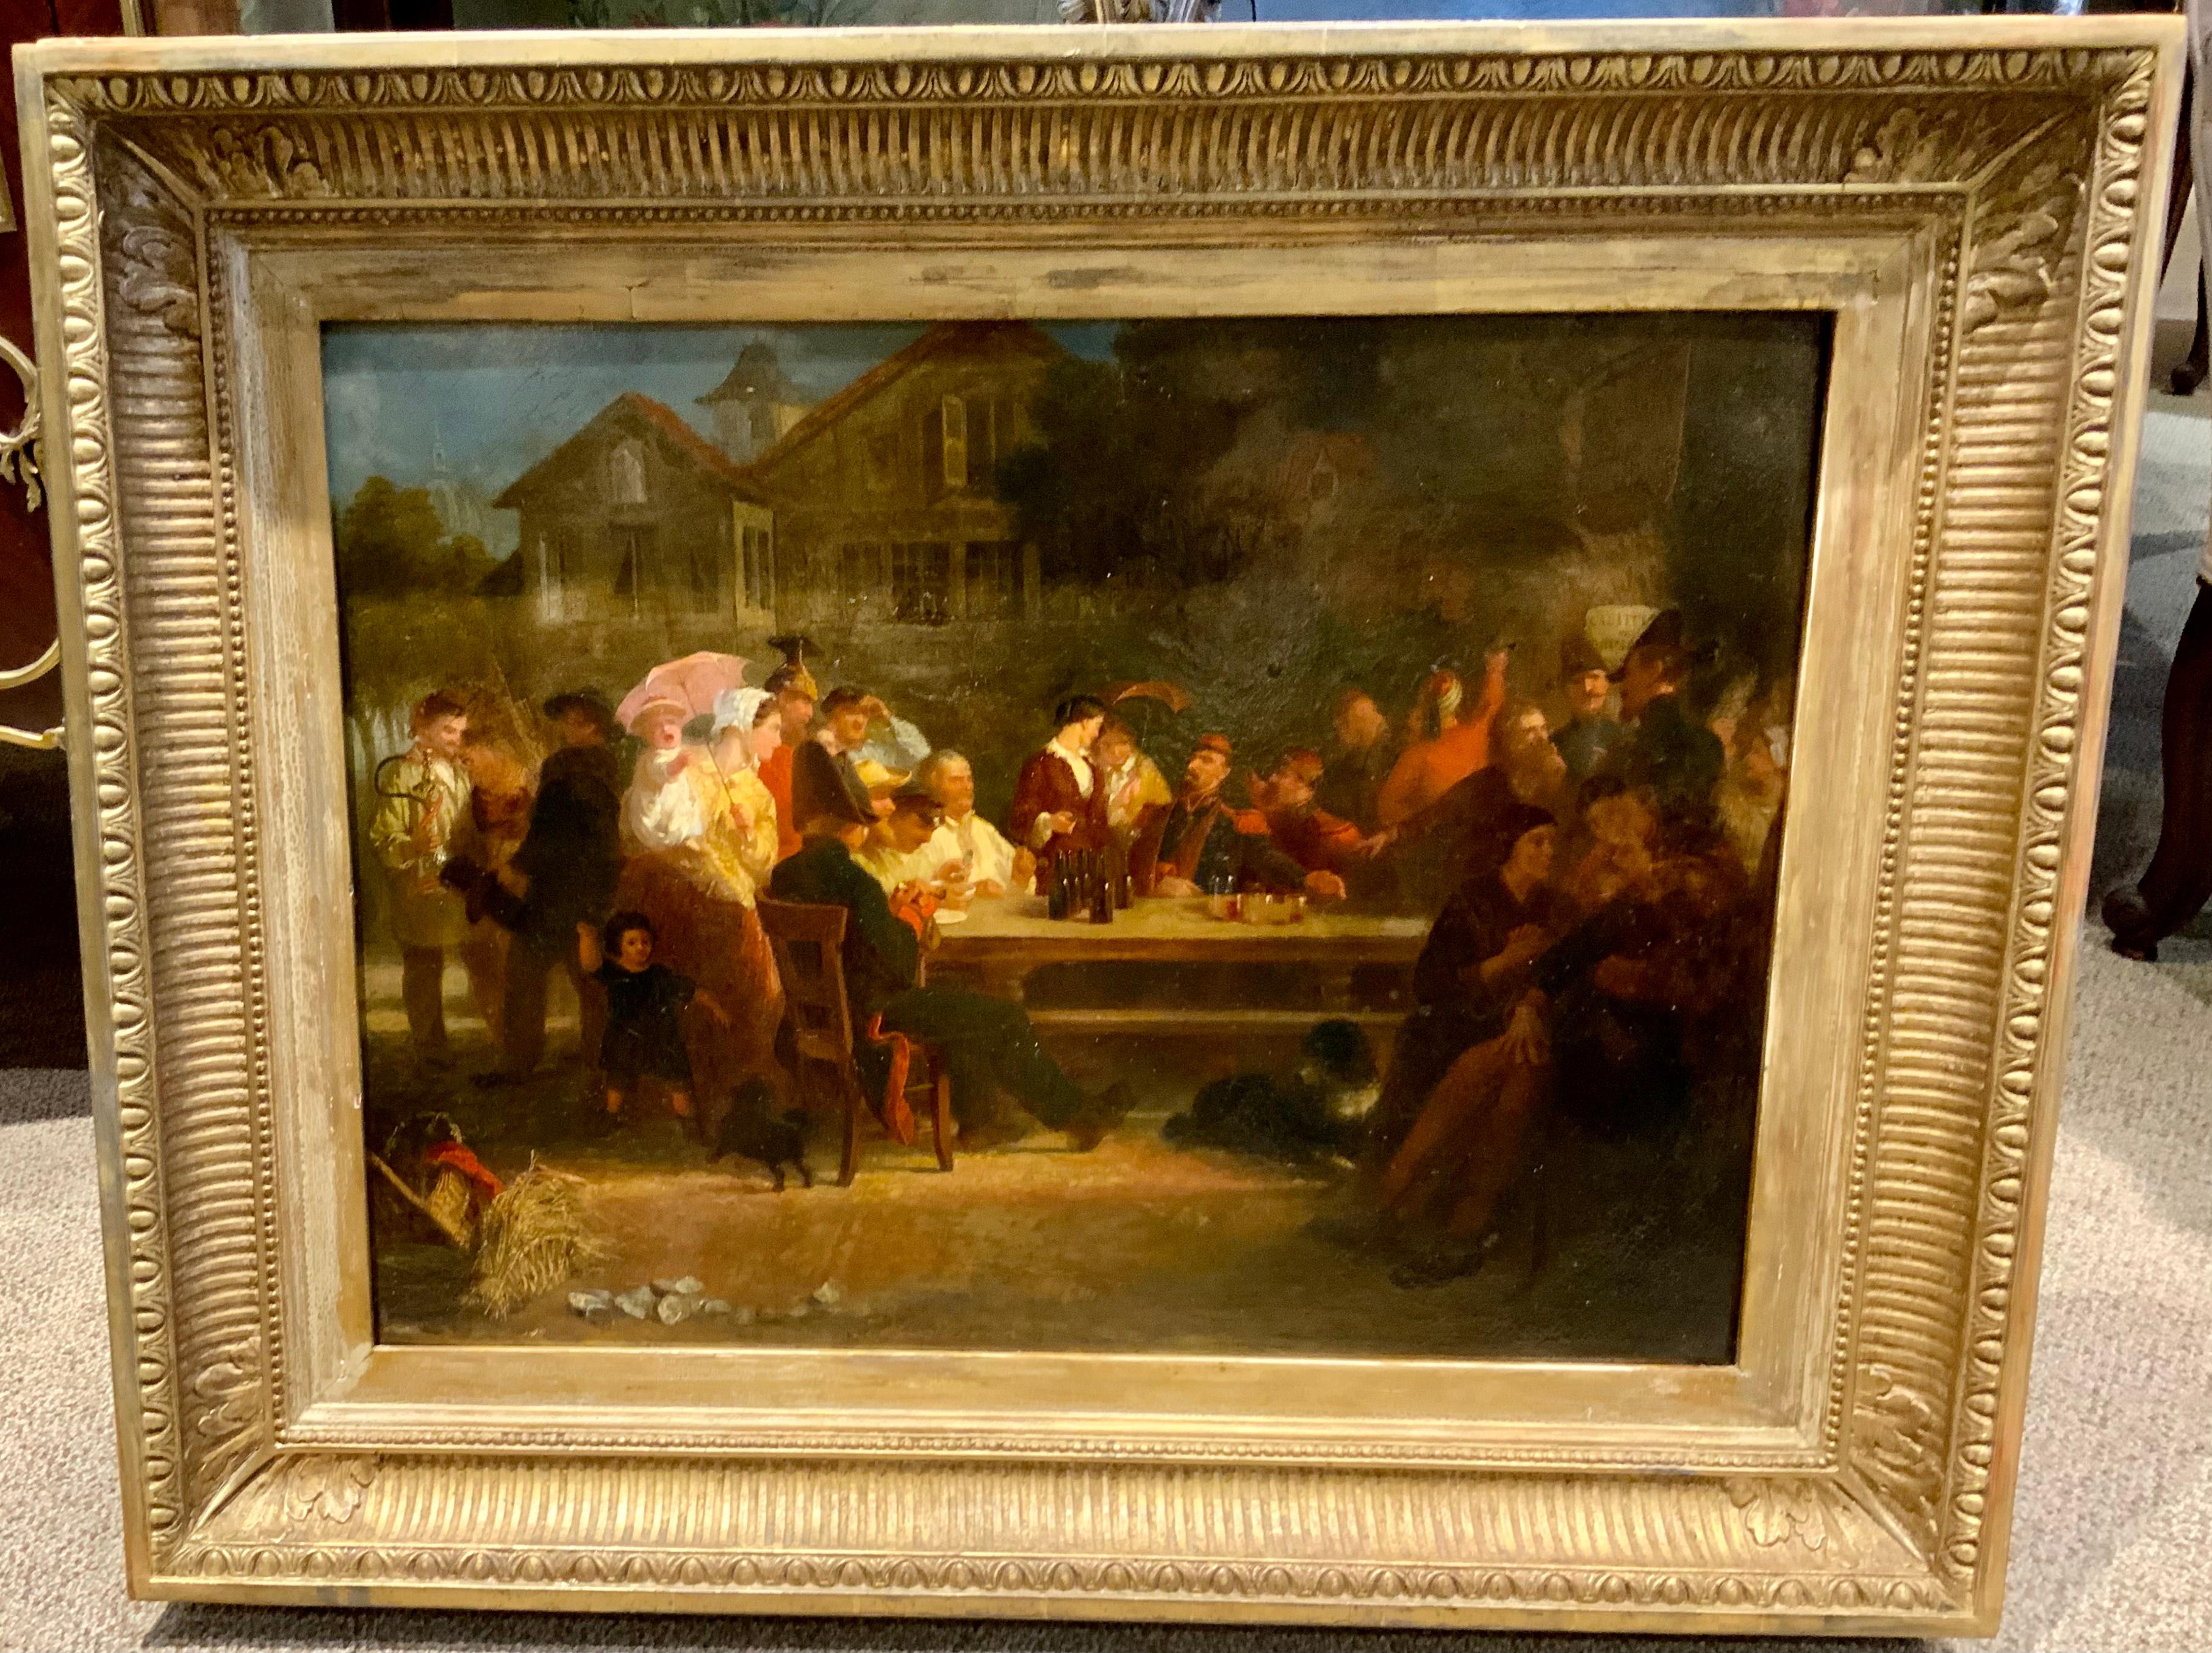 This original oil on canvas is attributed to Joseph Morgan
In Austria. 1839-1898. It is totaled “outdoor repast”
No repairs to the canvas and it has the original wood gilt 
Heavily carved frame. The colors are excellent and no repairs 
Have been